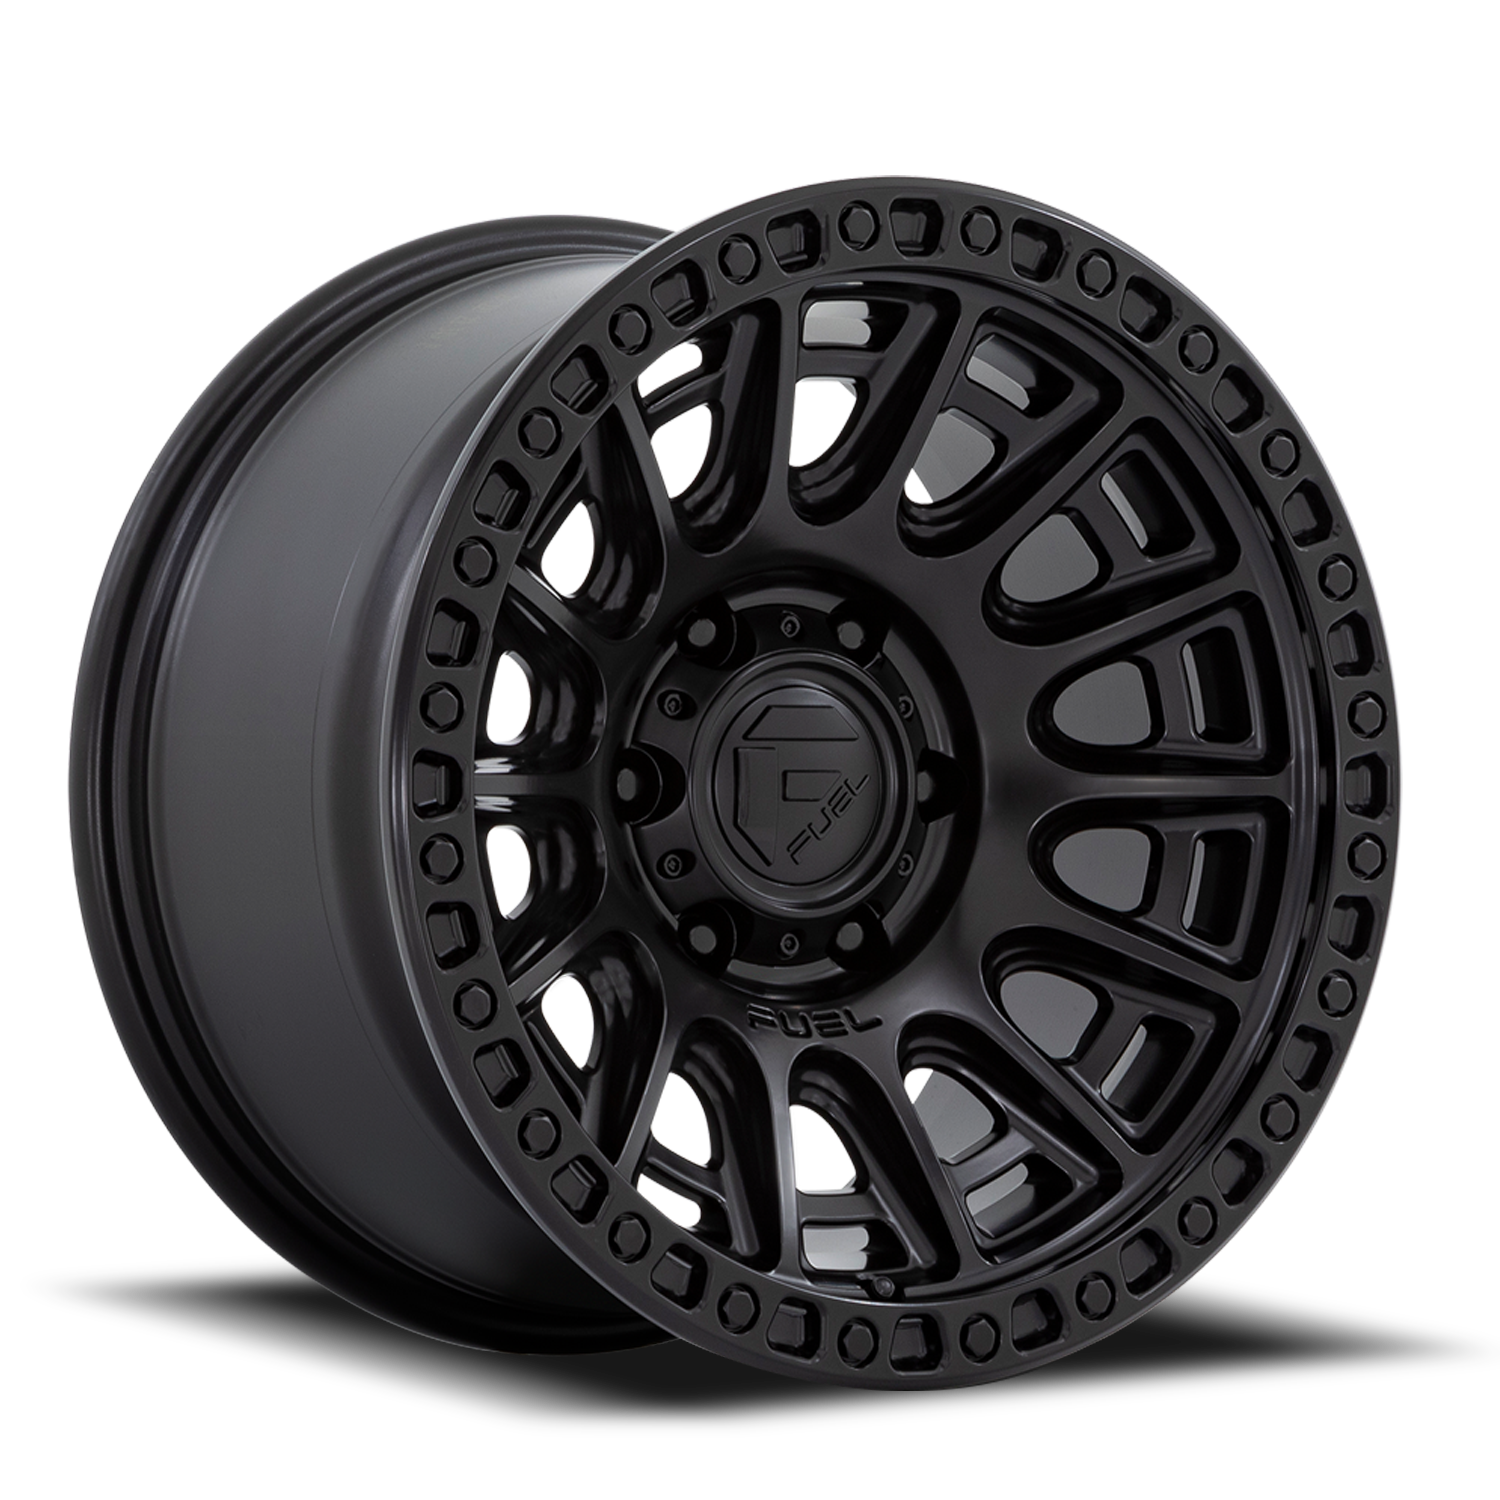 Aluminum Wheels 20X9 Cycle D832 6 On 139.7 Blackout 106.1 Bore 1 Offset 34.2 Lbs Fuel Off Road Wheels